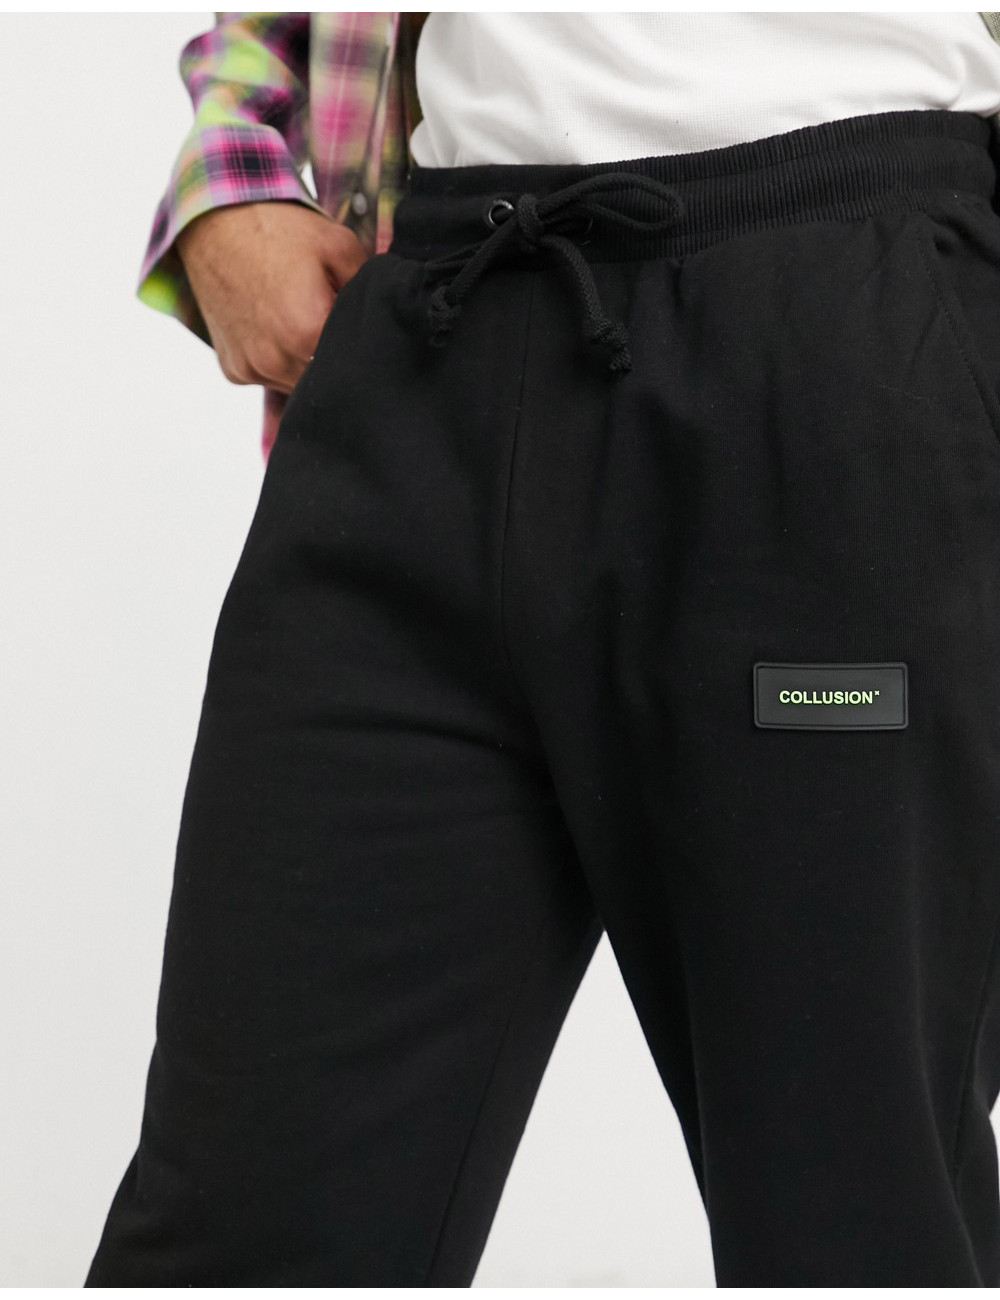 COLLUSION branded joggers...